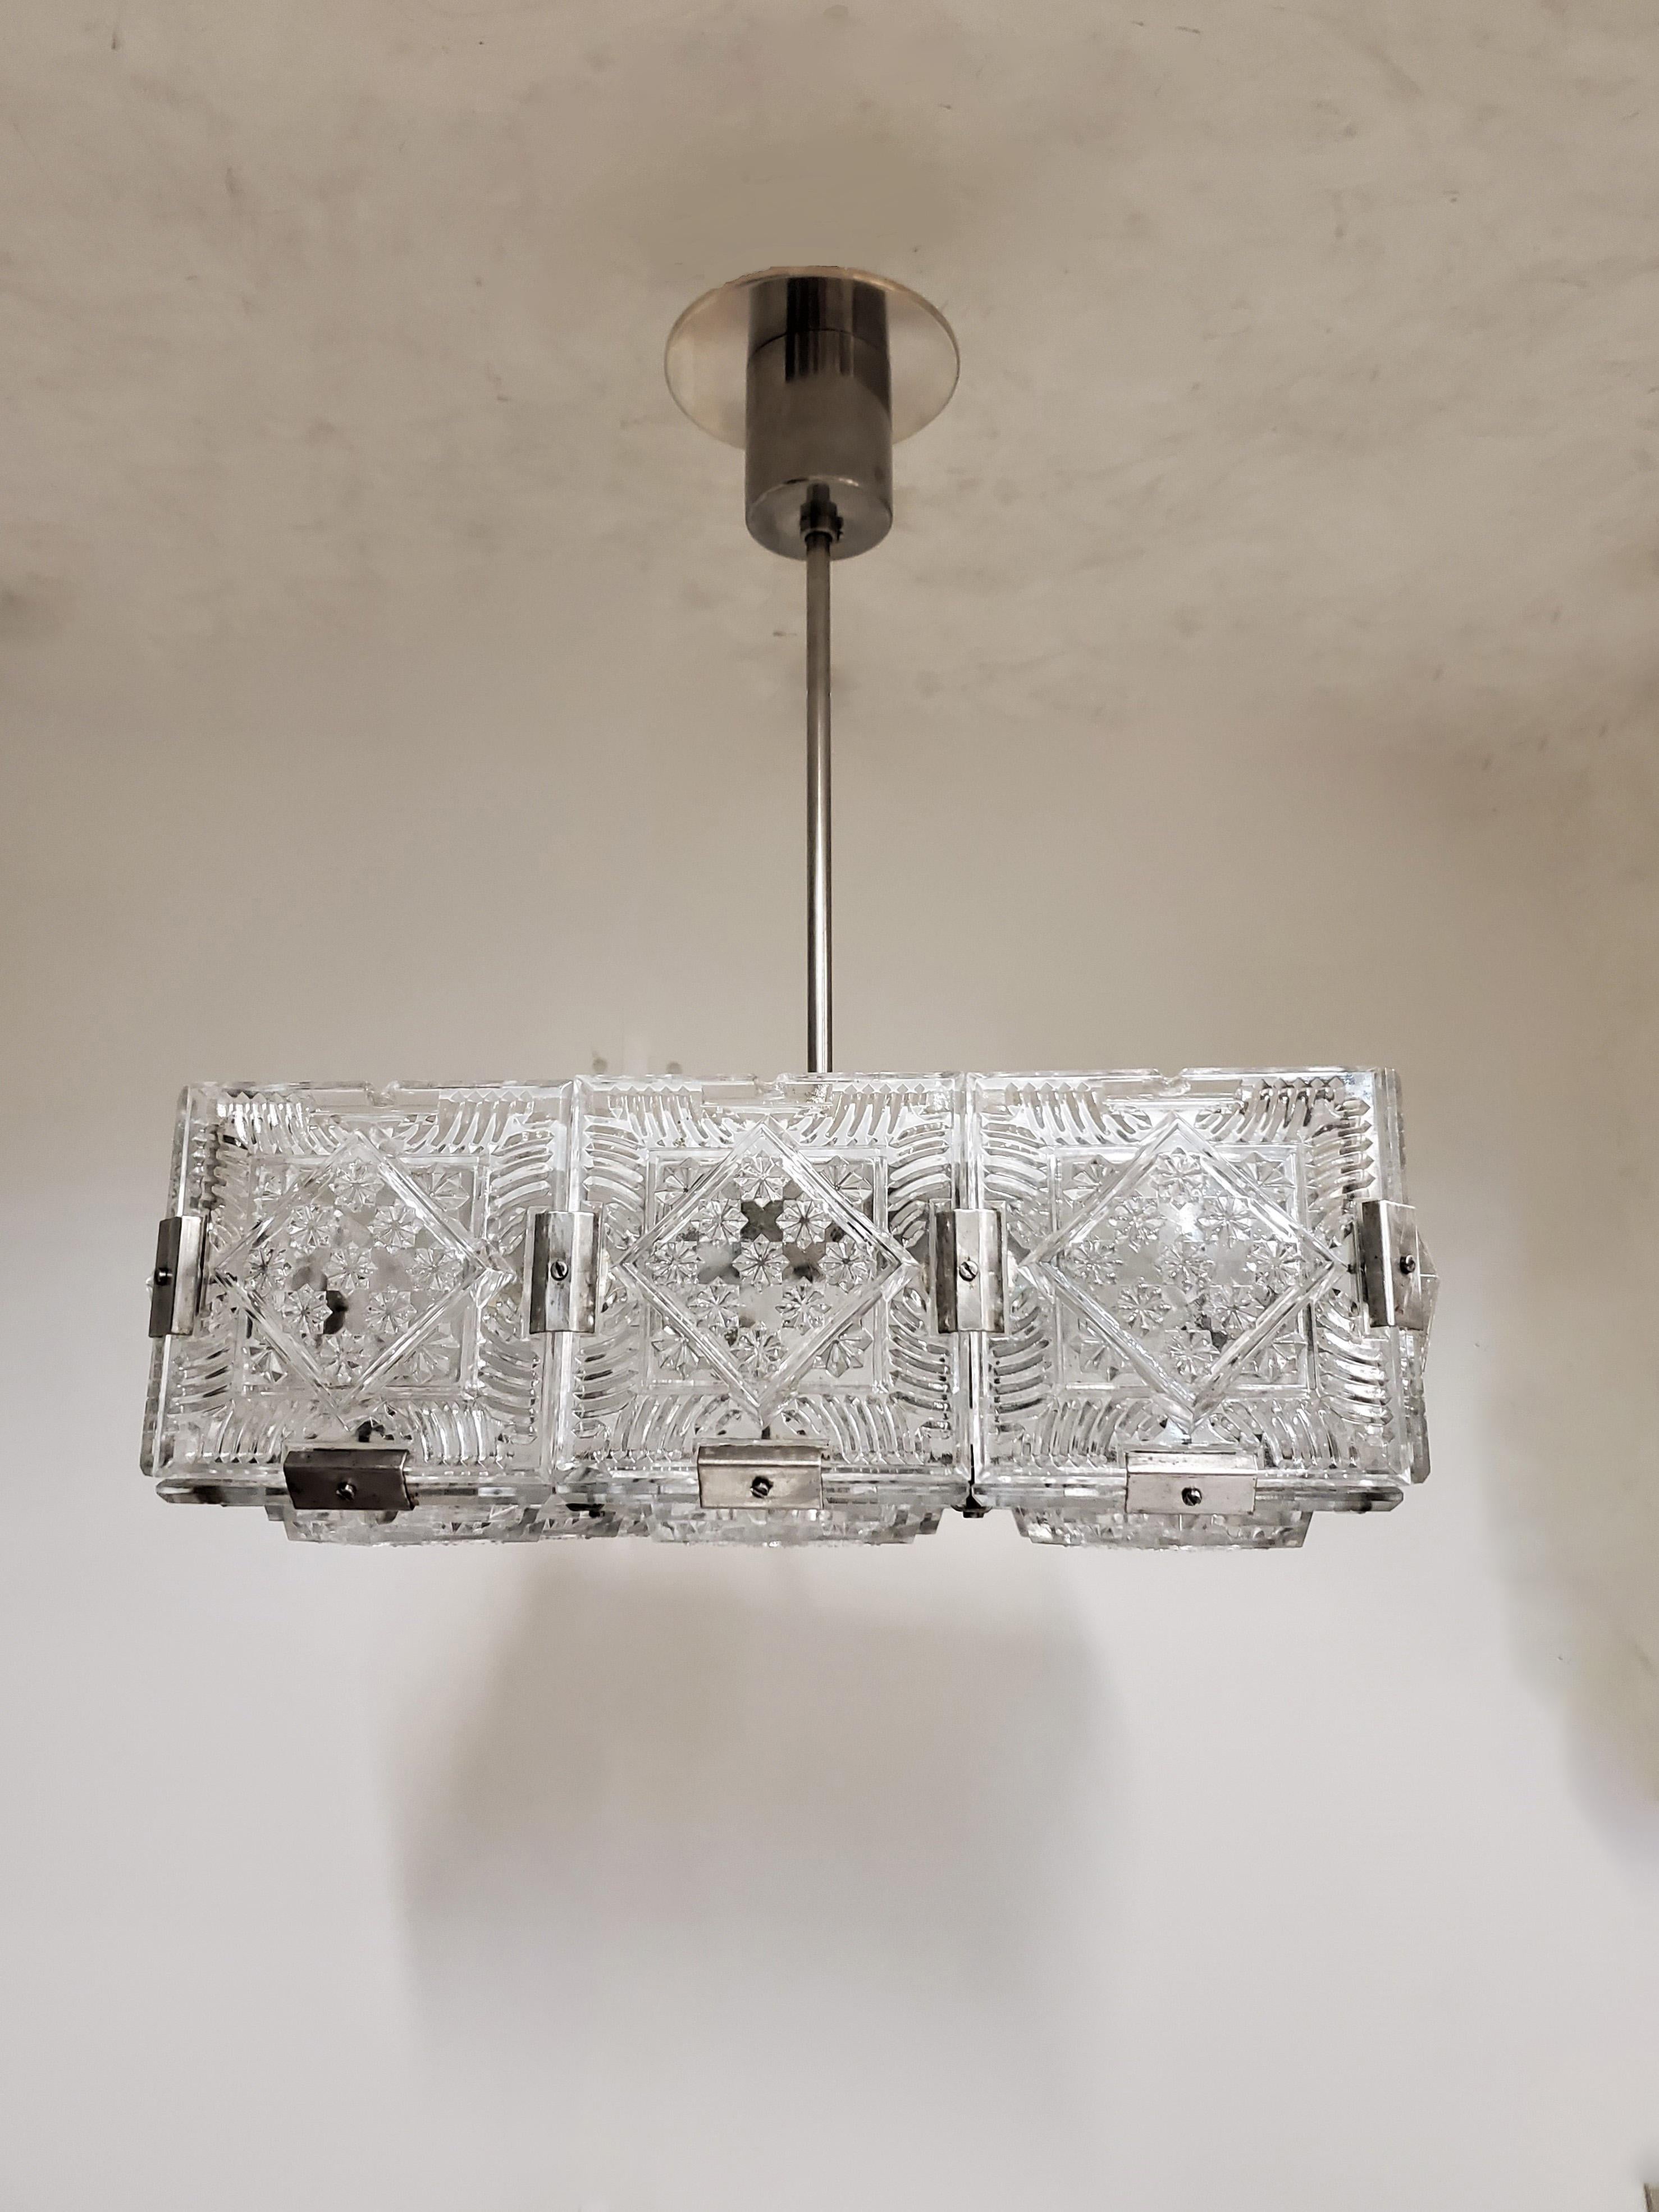 Pair of Mid-Century Modern Square Chandeliers in Glass and Nickel For Sale 2